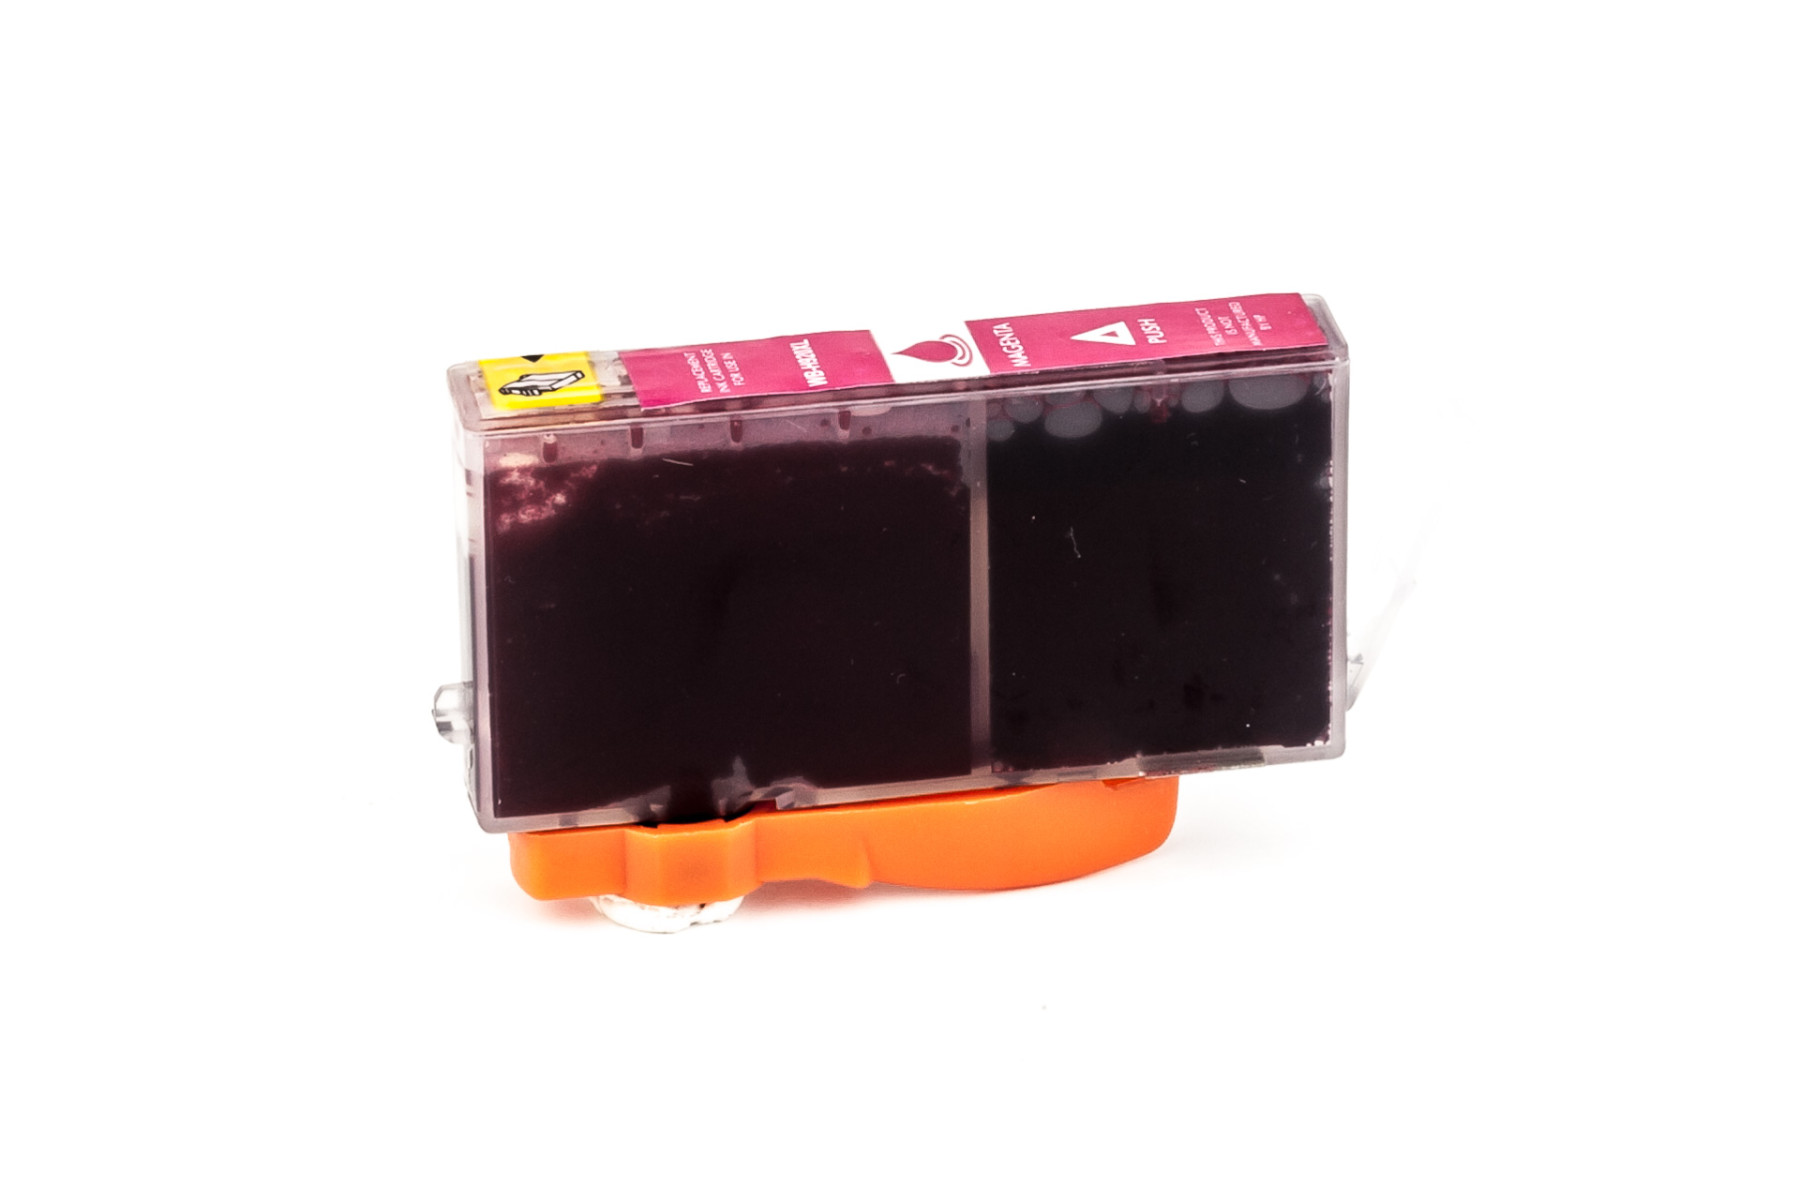 Set consisting of Ink cartridge (alternative) compatible with HP - CD975AE /  CD 975 AE /  920XL - Officejet 6000 black, CD972AE/CD 972 AE - 920XL - Officejet 6000 cyan, CD973AE/CD 973 AE - 920XL - Officejet 6000 magenta, CD974AE/CD 974 AE - 920XL - Offic